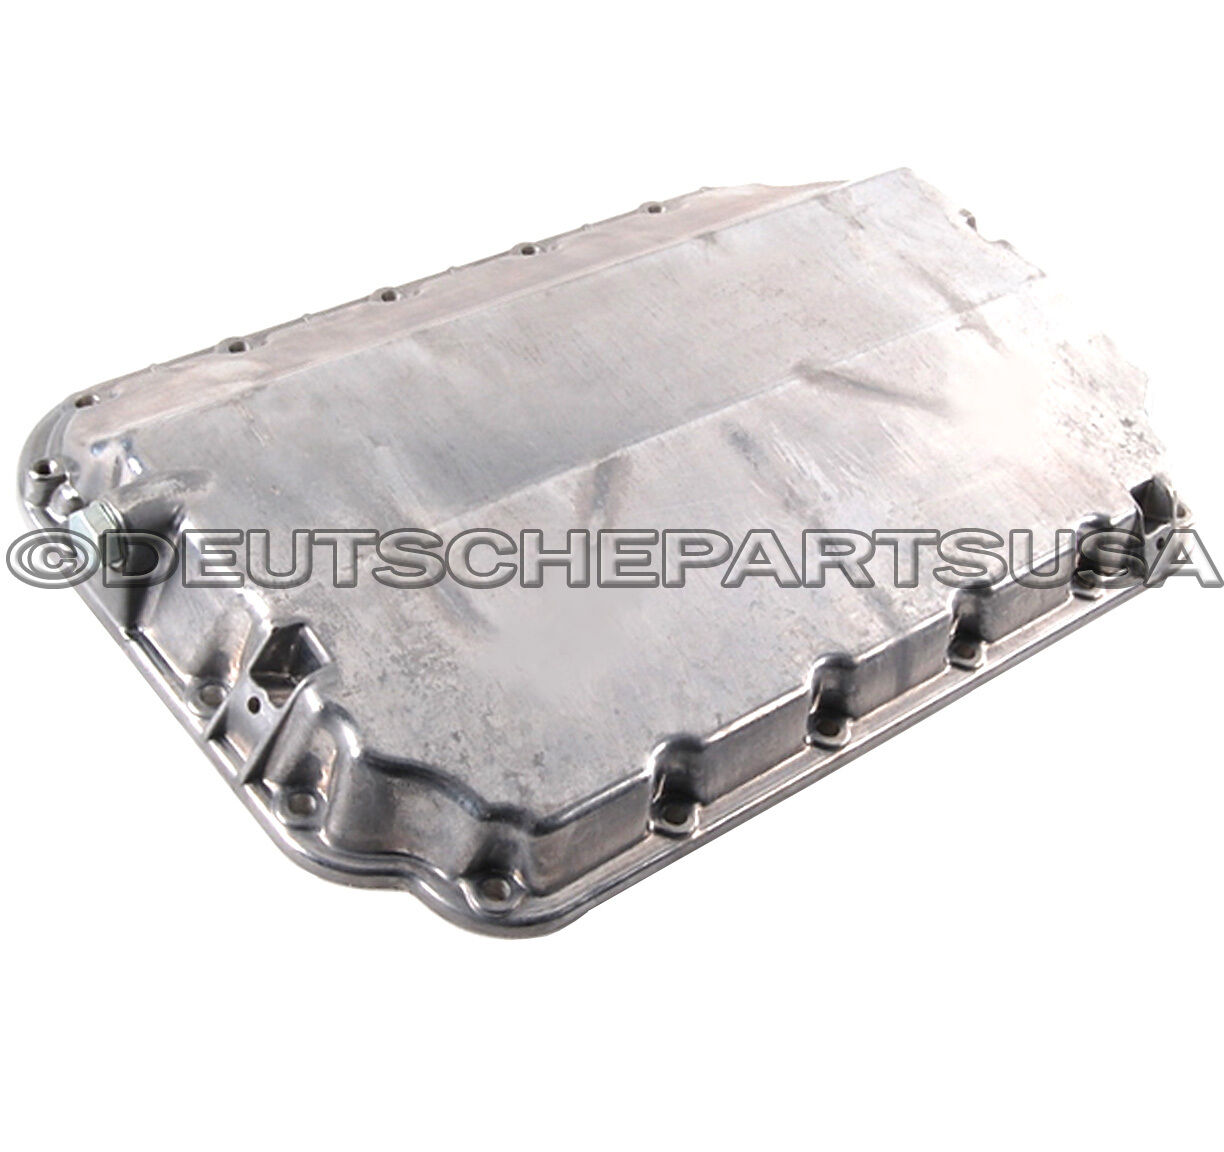 AUDI 90 A6 A4 QUATTRO CABRIOLET FRONT ENGINE OIL PAN LOWER 2.8 V6 # 078 103 604H